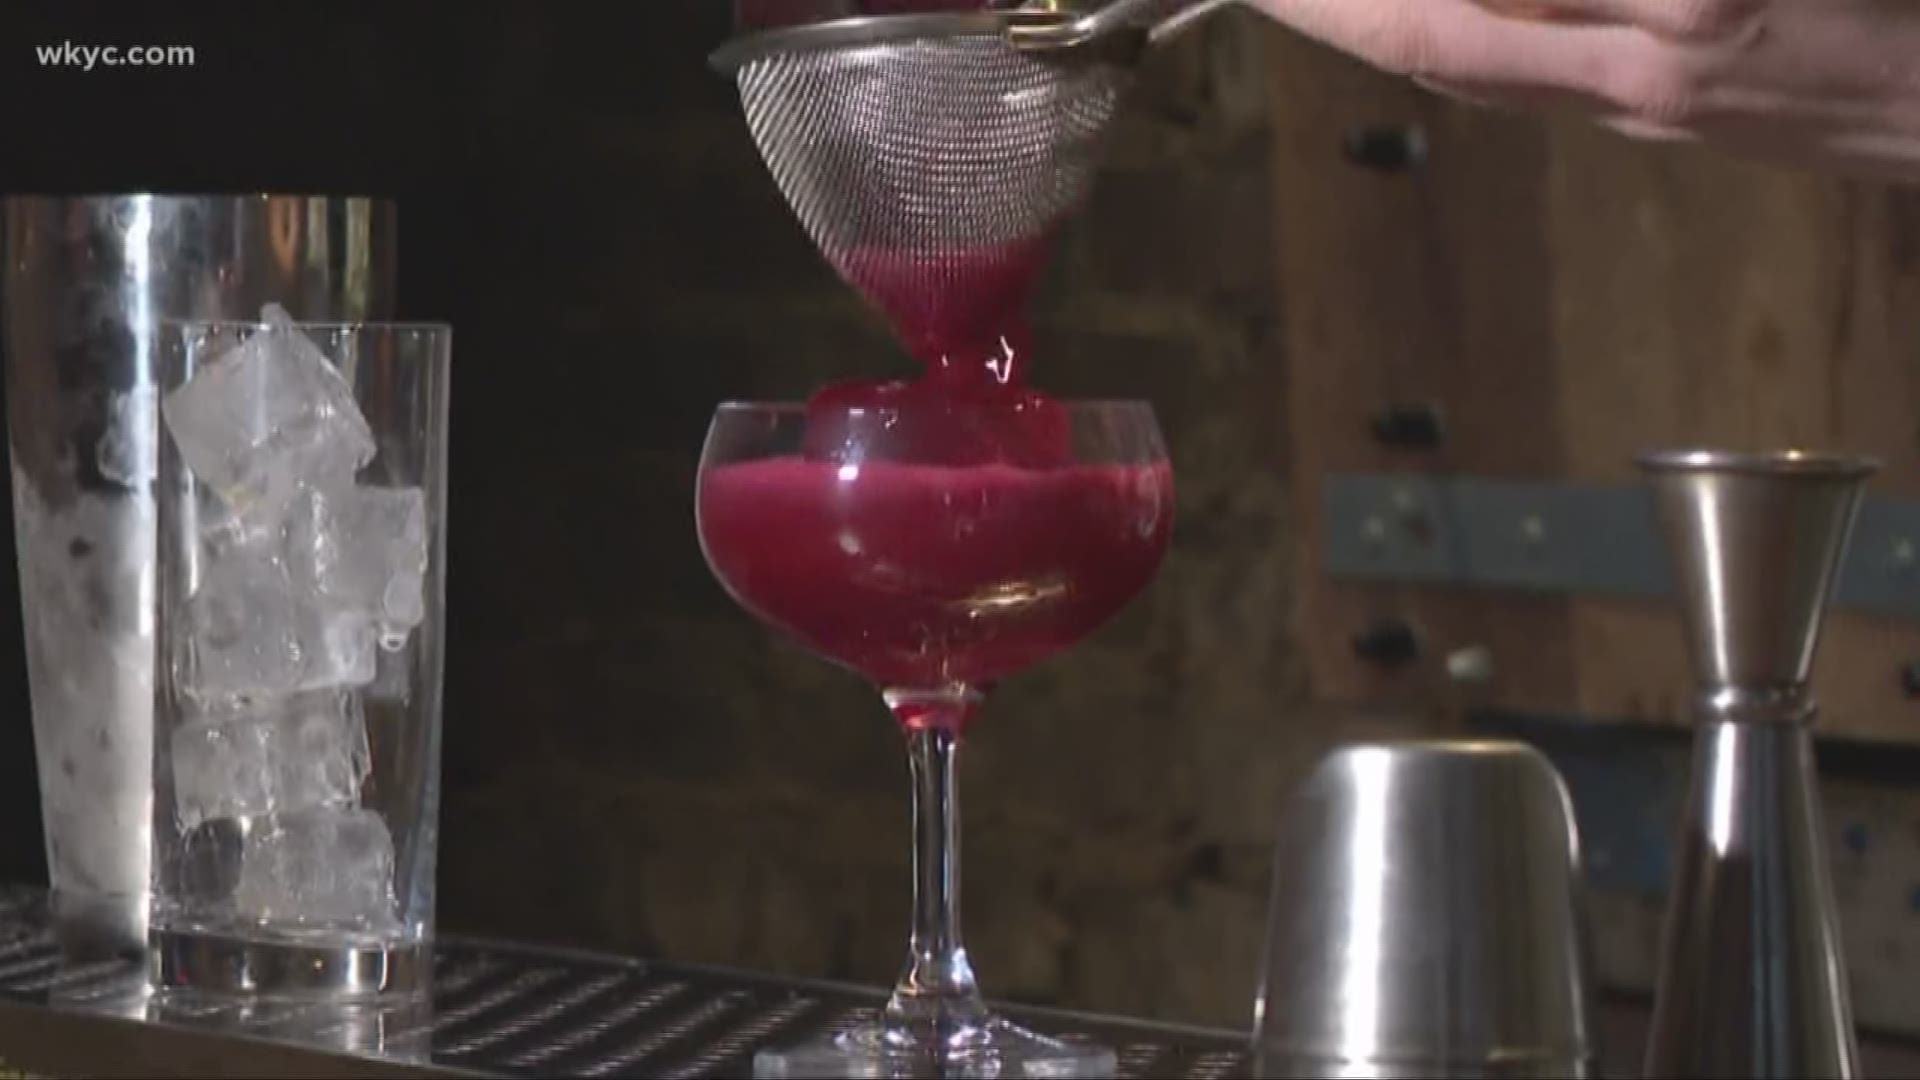 Prohibition may long be over, but speakeasy-style spots are hotter than ever, so WKYC's Alexa Lee checked out a few of Cleveland's coolest under-the-radar cocktail bars and restaurants.